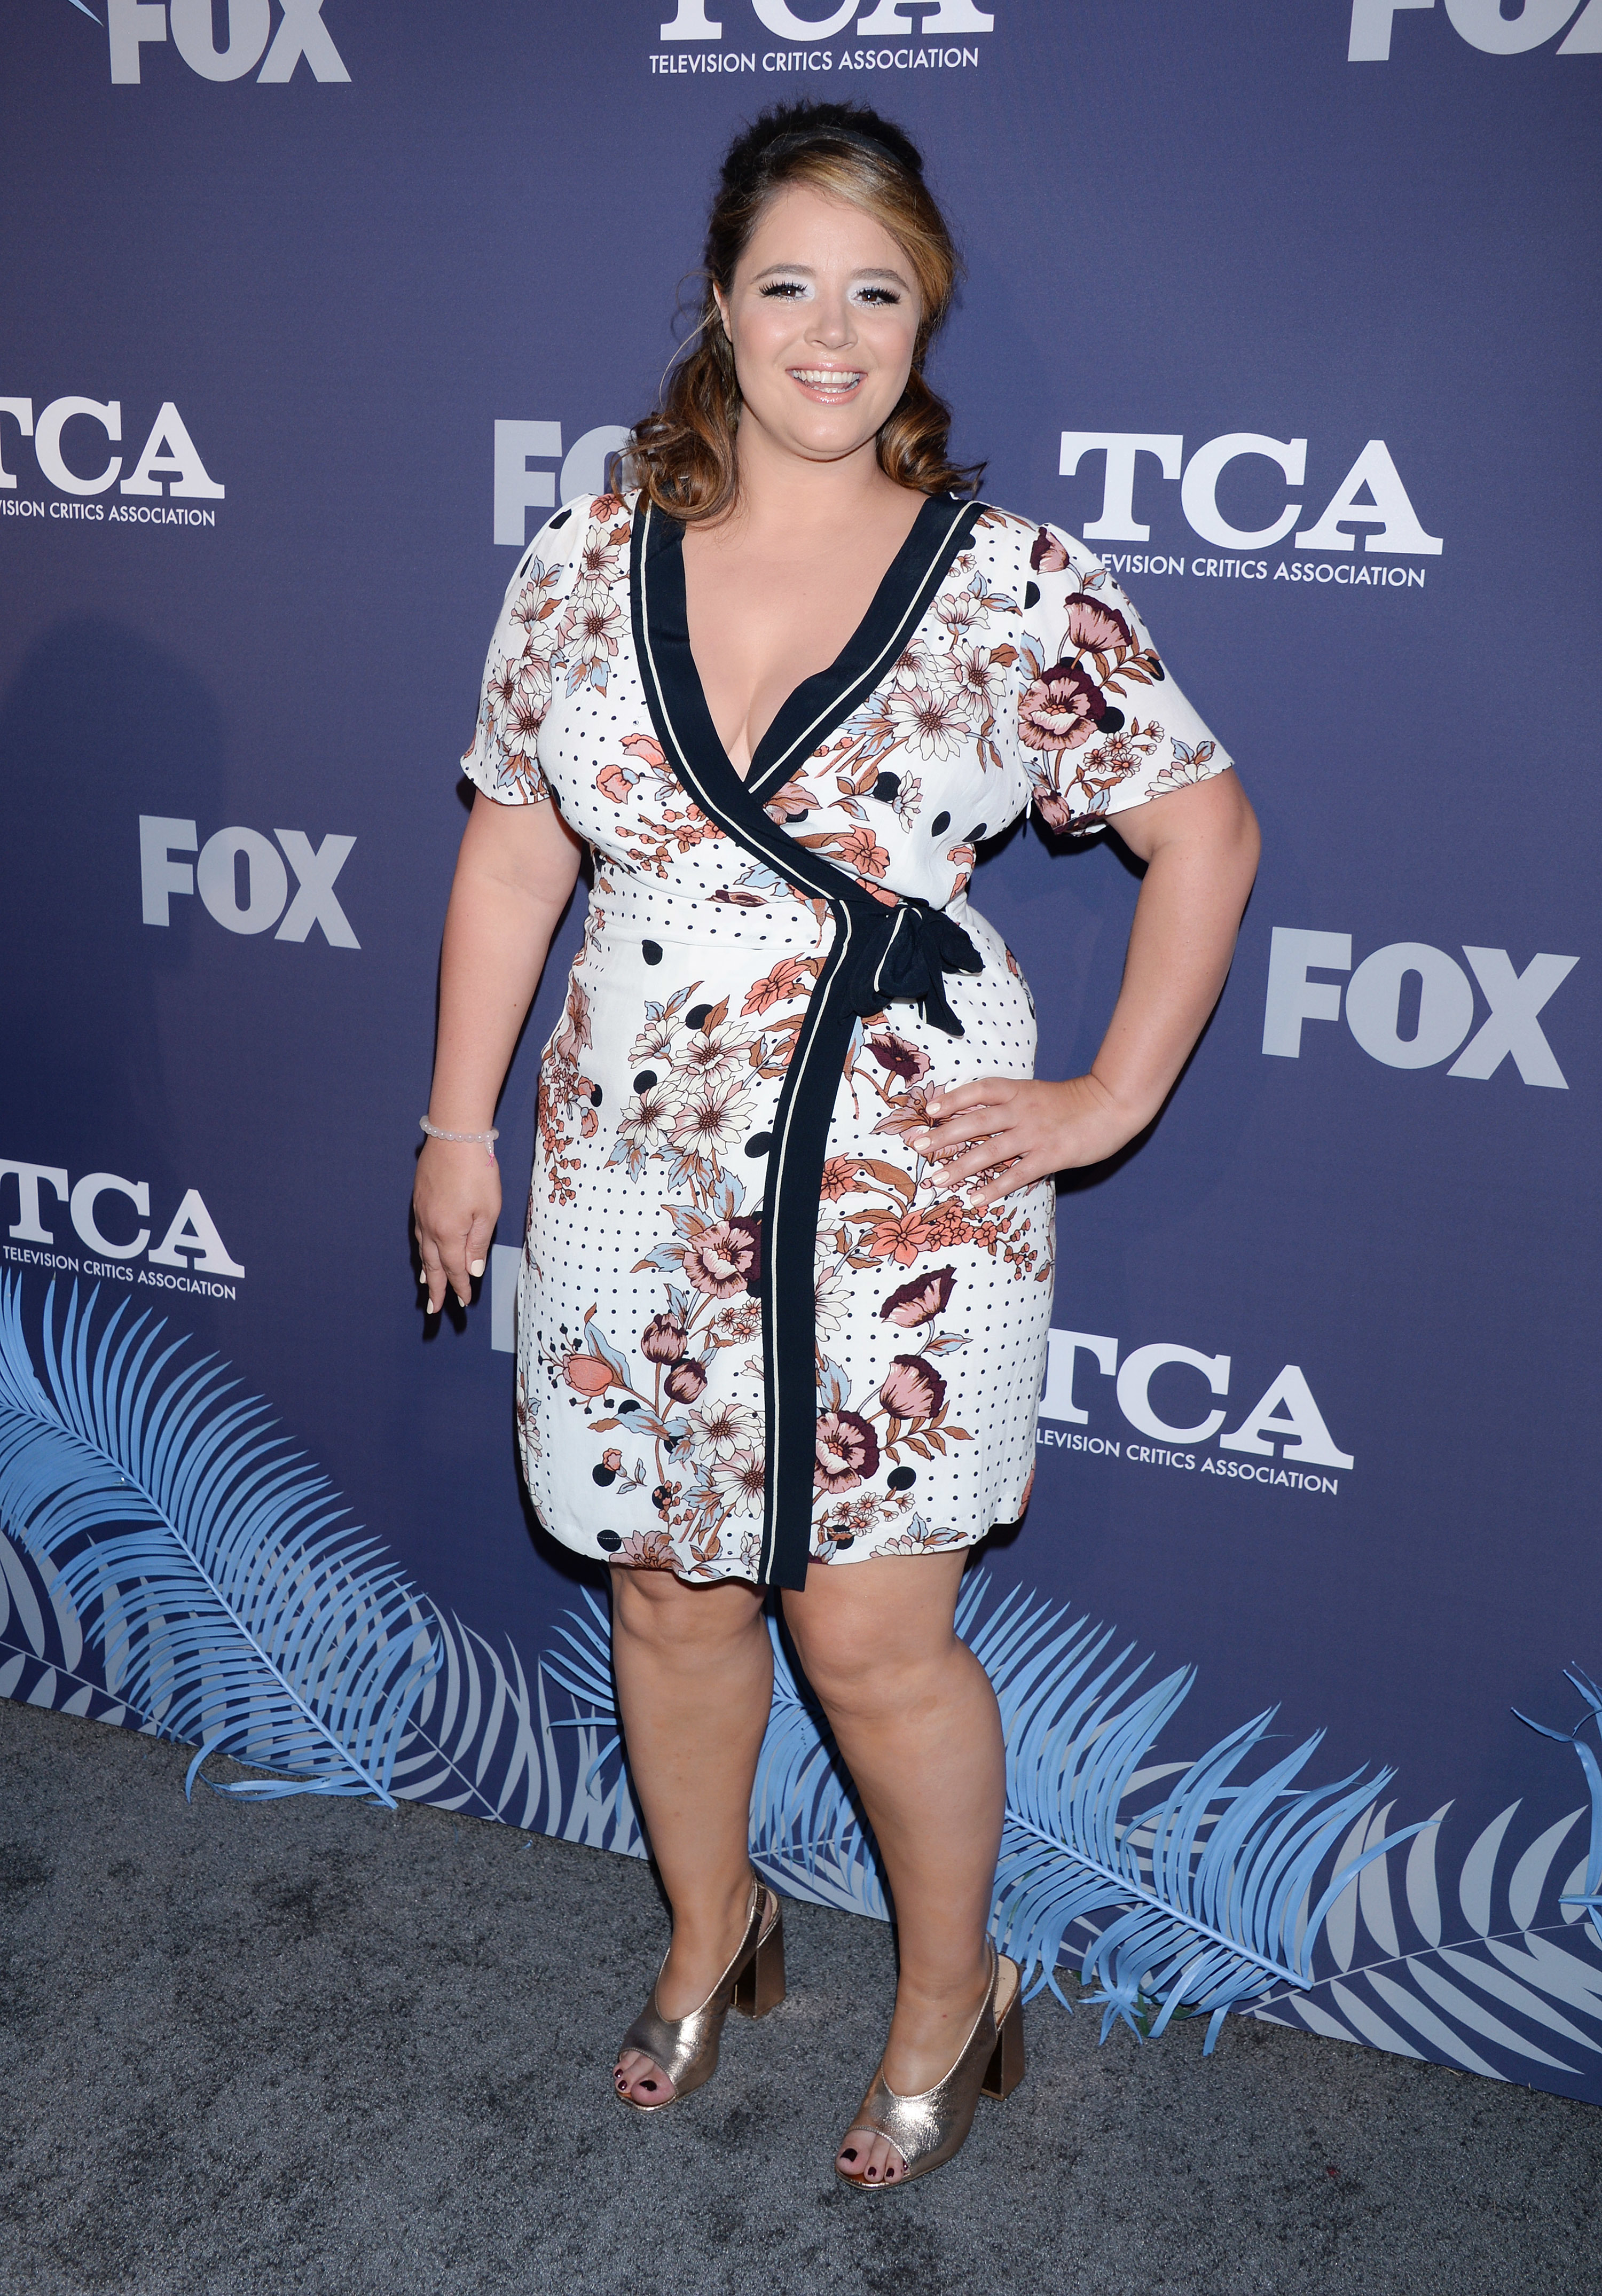 Kether donohue sexy